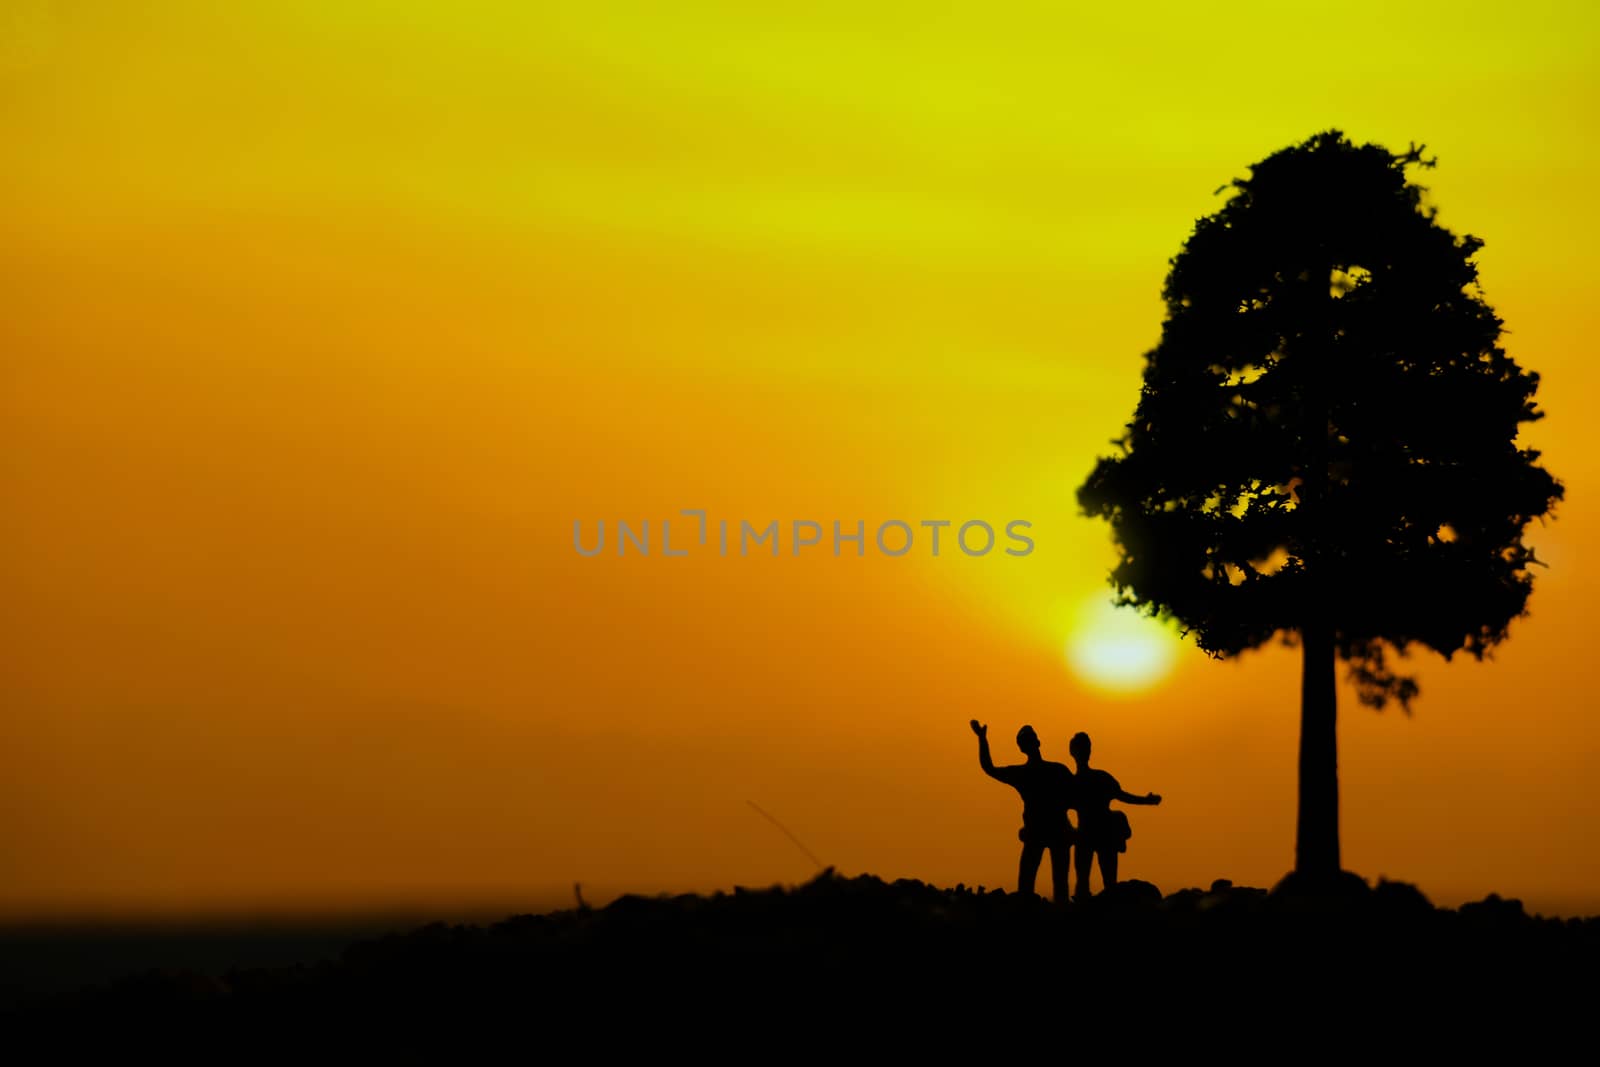 miniature people / toy photography - conceptual valentine holiday illustration. Happy couple holding each other enjoying sunset view bellow a big tree by Macrostud